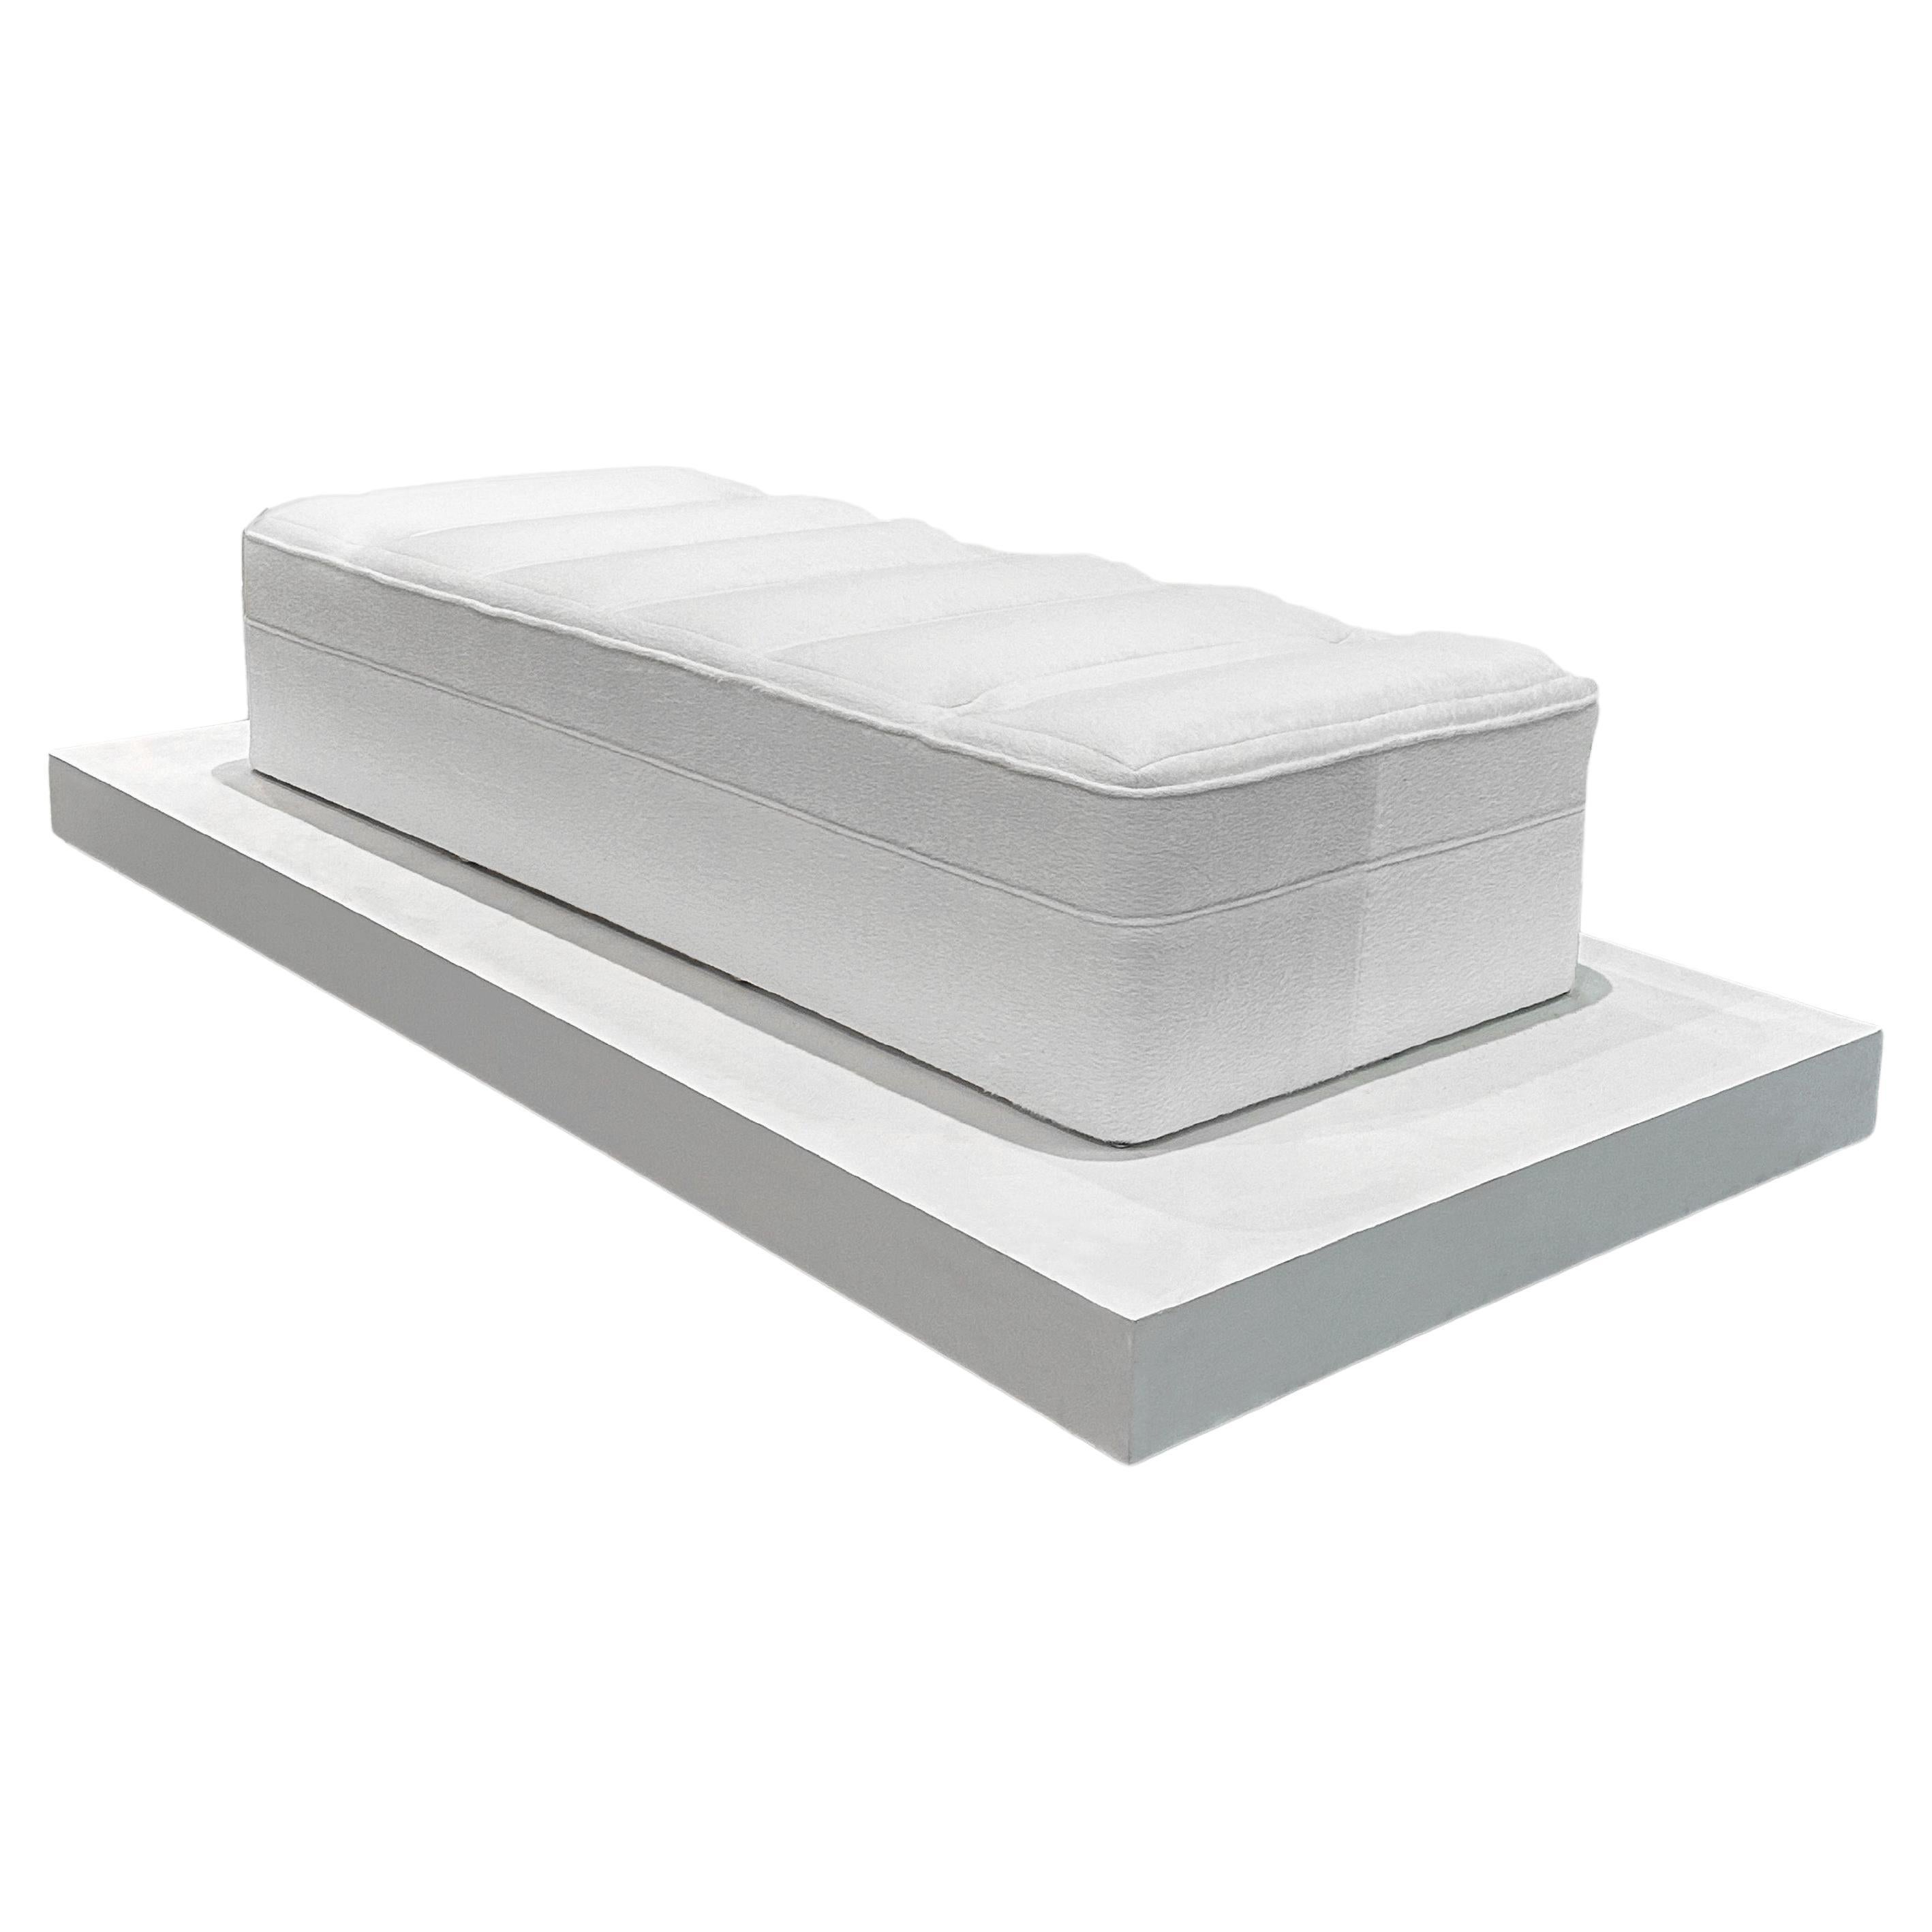 Rachel Whiteread, Daybed